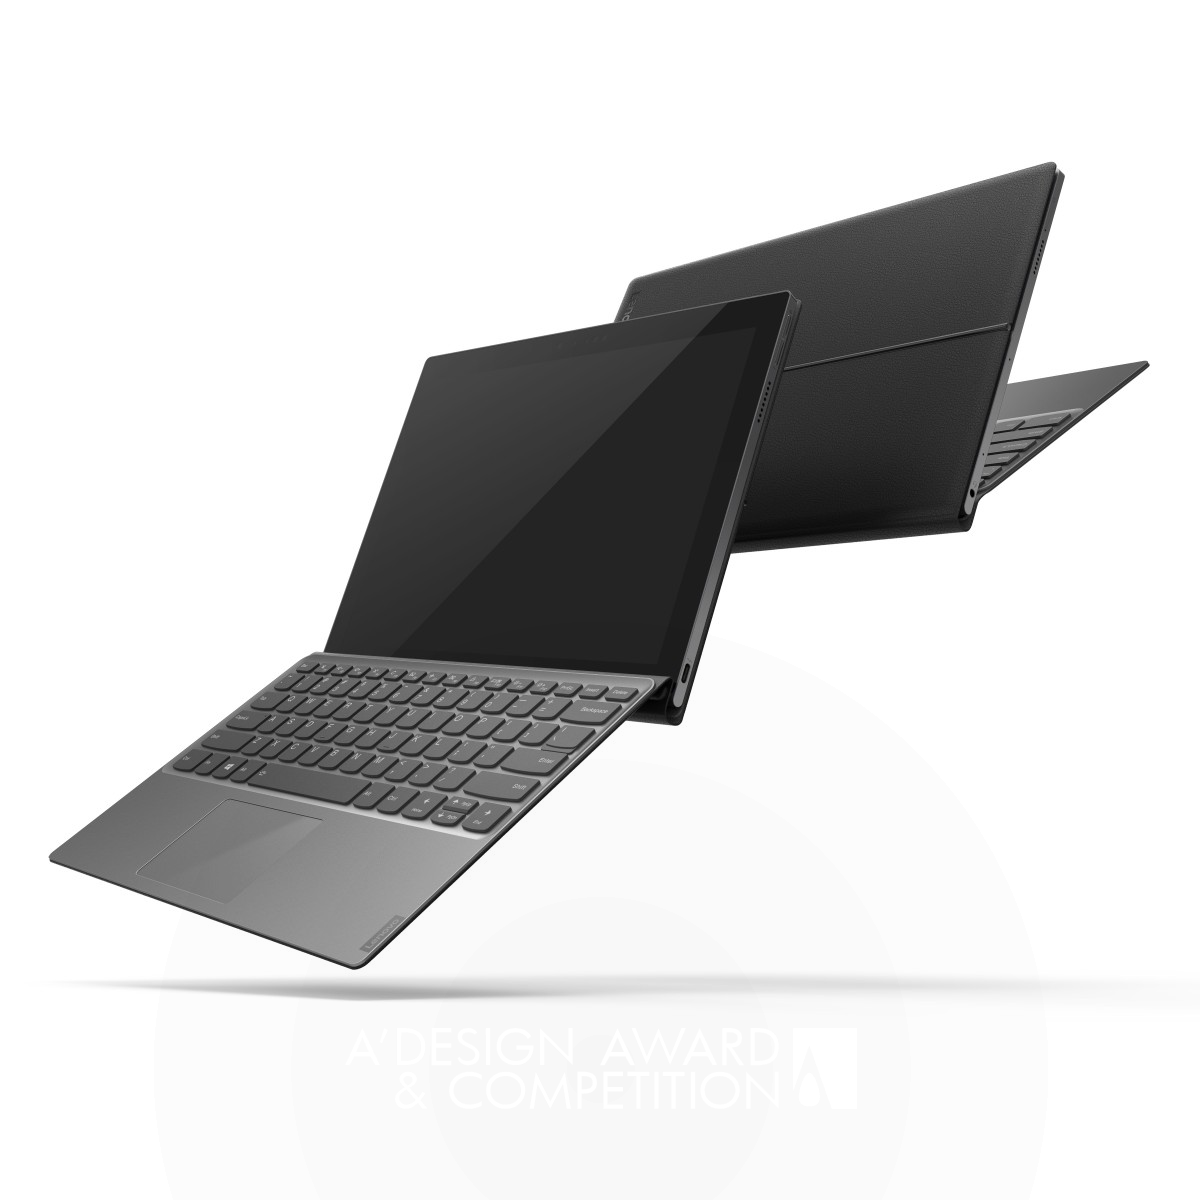 Miix 630 Rossion laptop computer by Lenovo Design Group